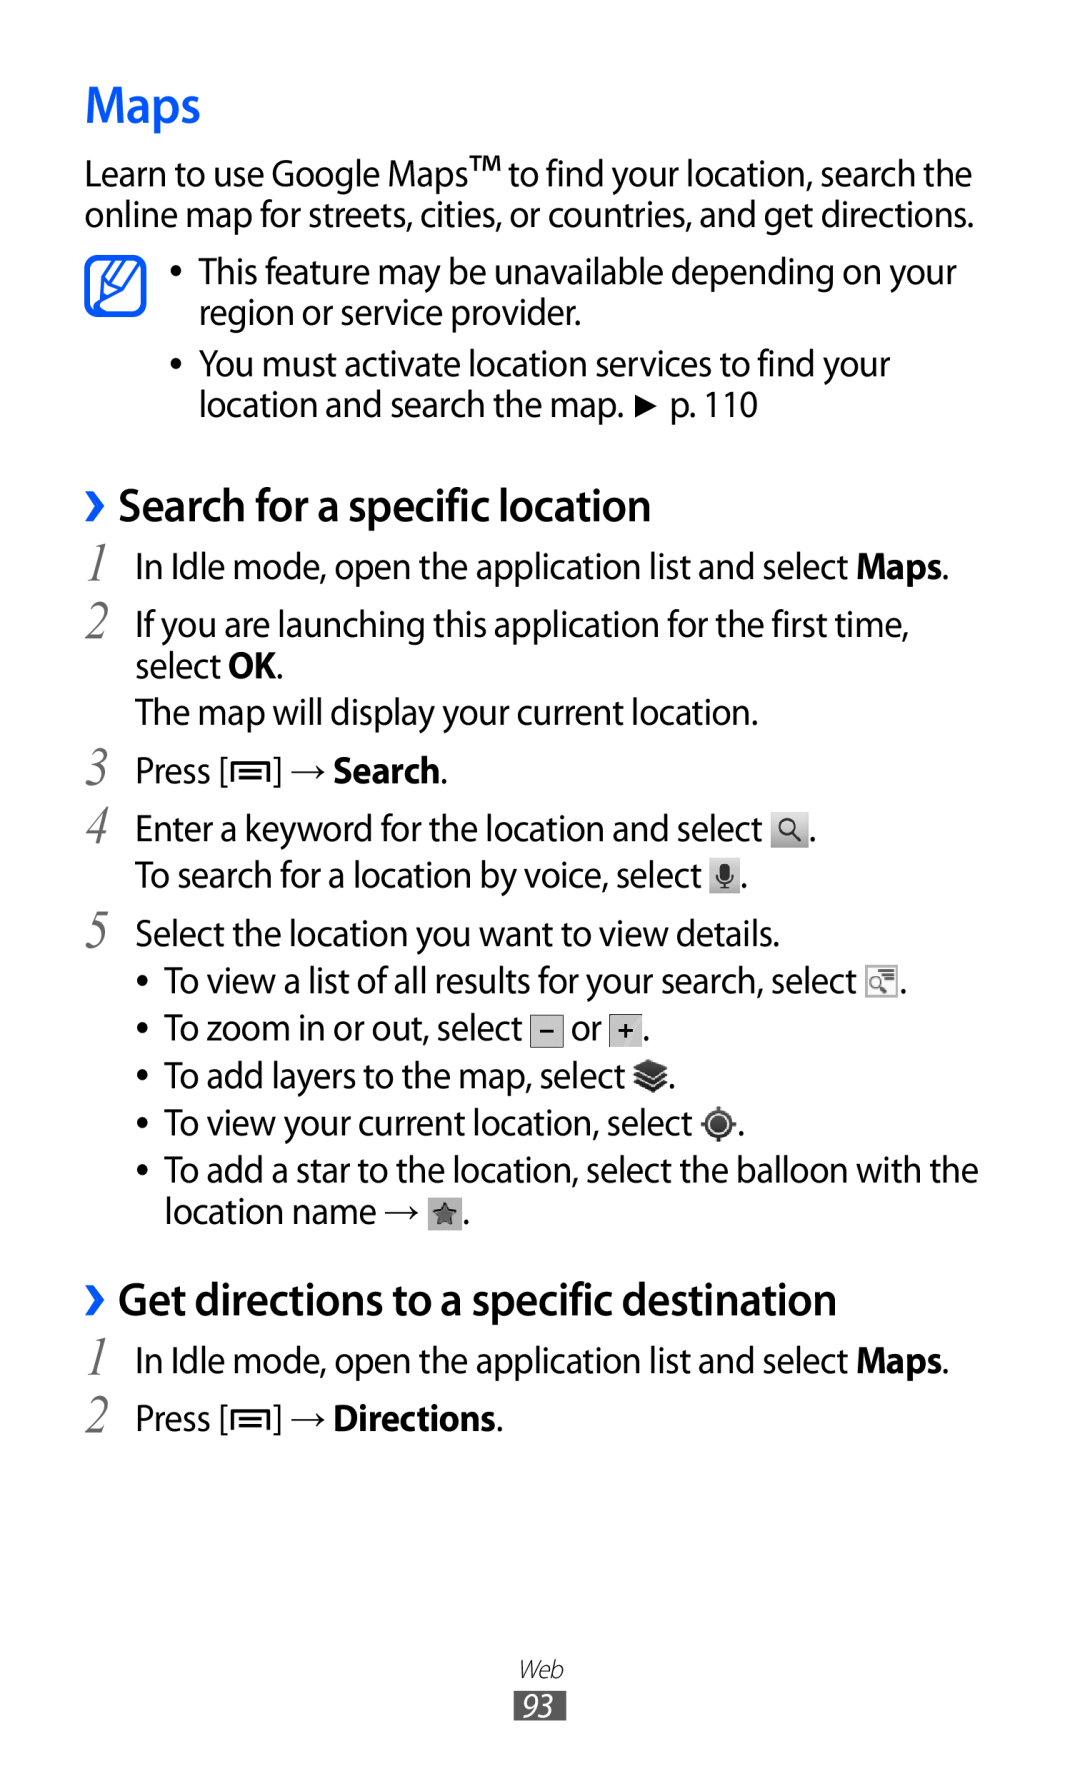 Samsung GT-I9070 user manual Maps, ››Search for a specific location, ››Get directions to a specific destination 